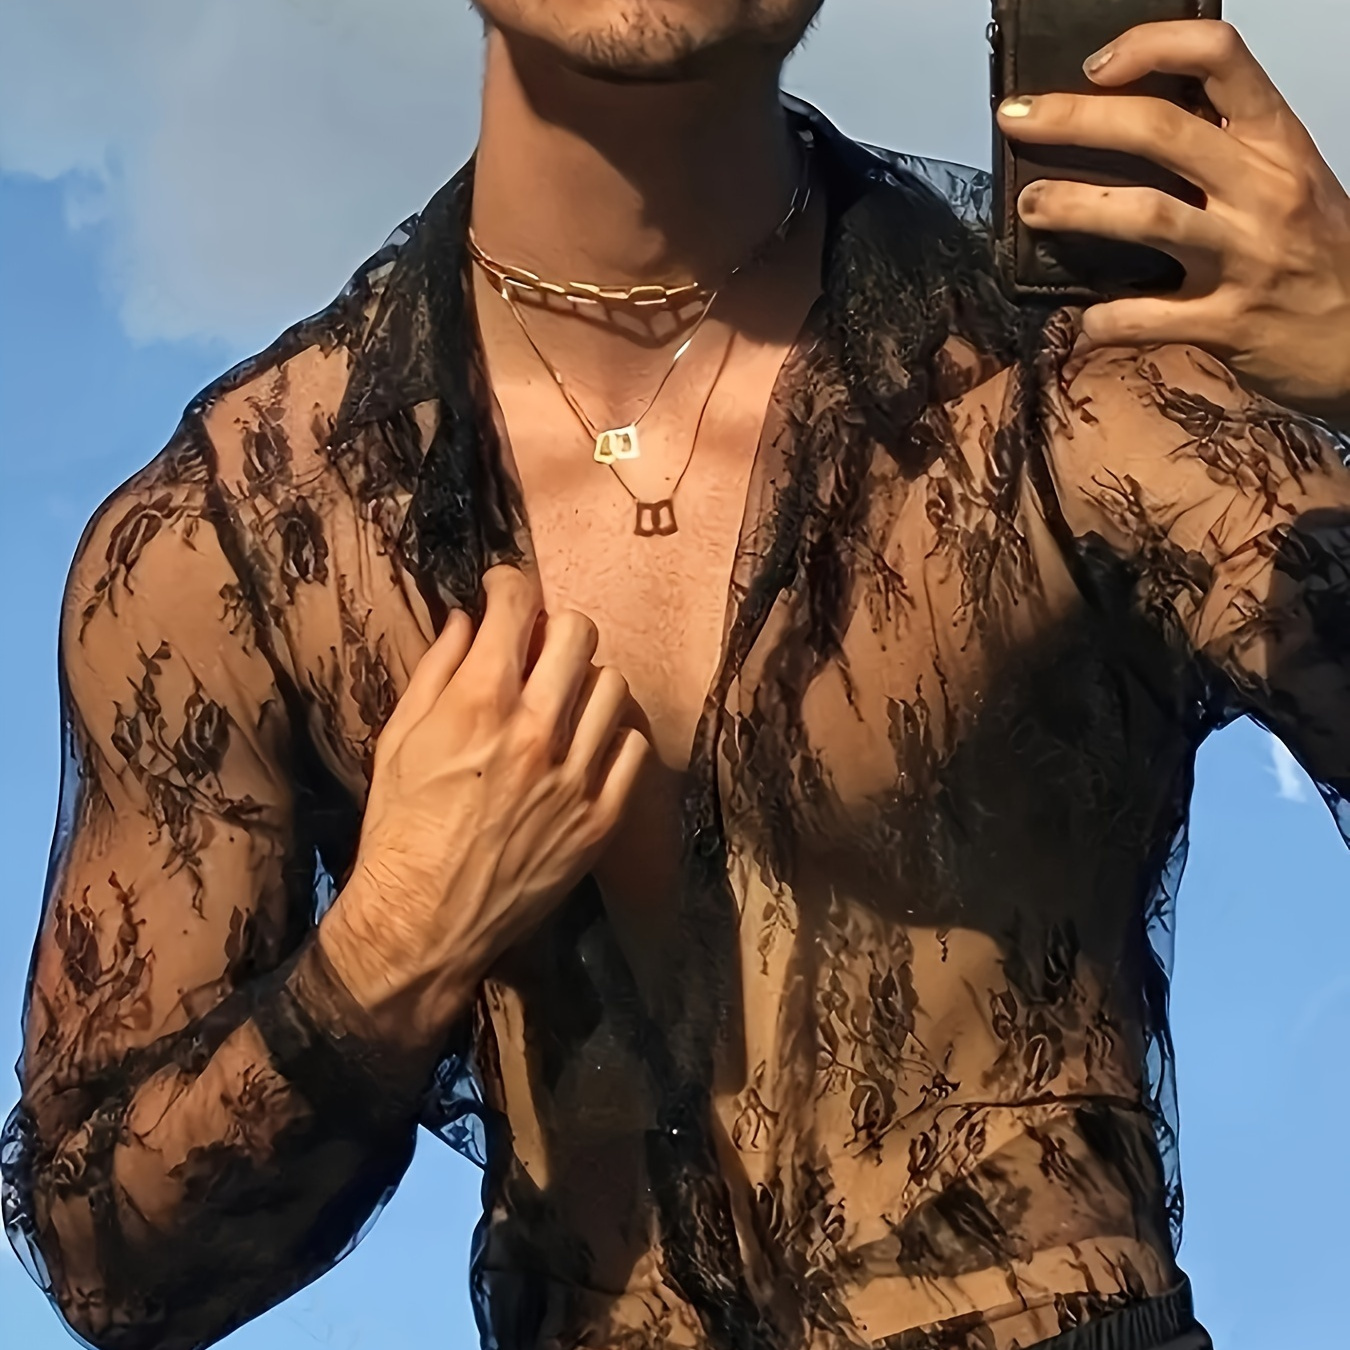 

Men's Sexy Sheer Shirt, Lightweight See-through Summer Top, Fashionable And Breathable, Ideal For Casual Or Party Wear